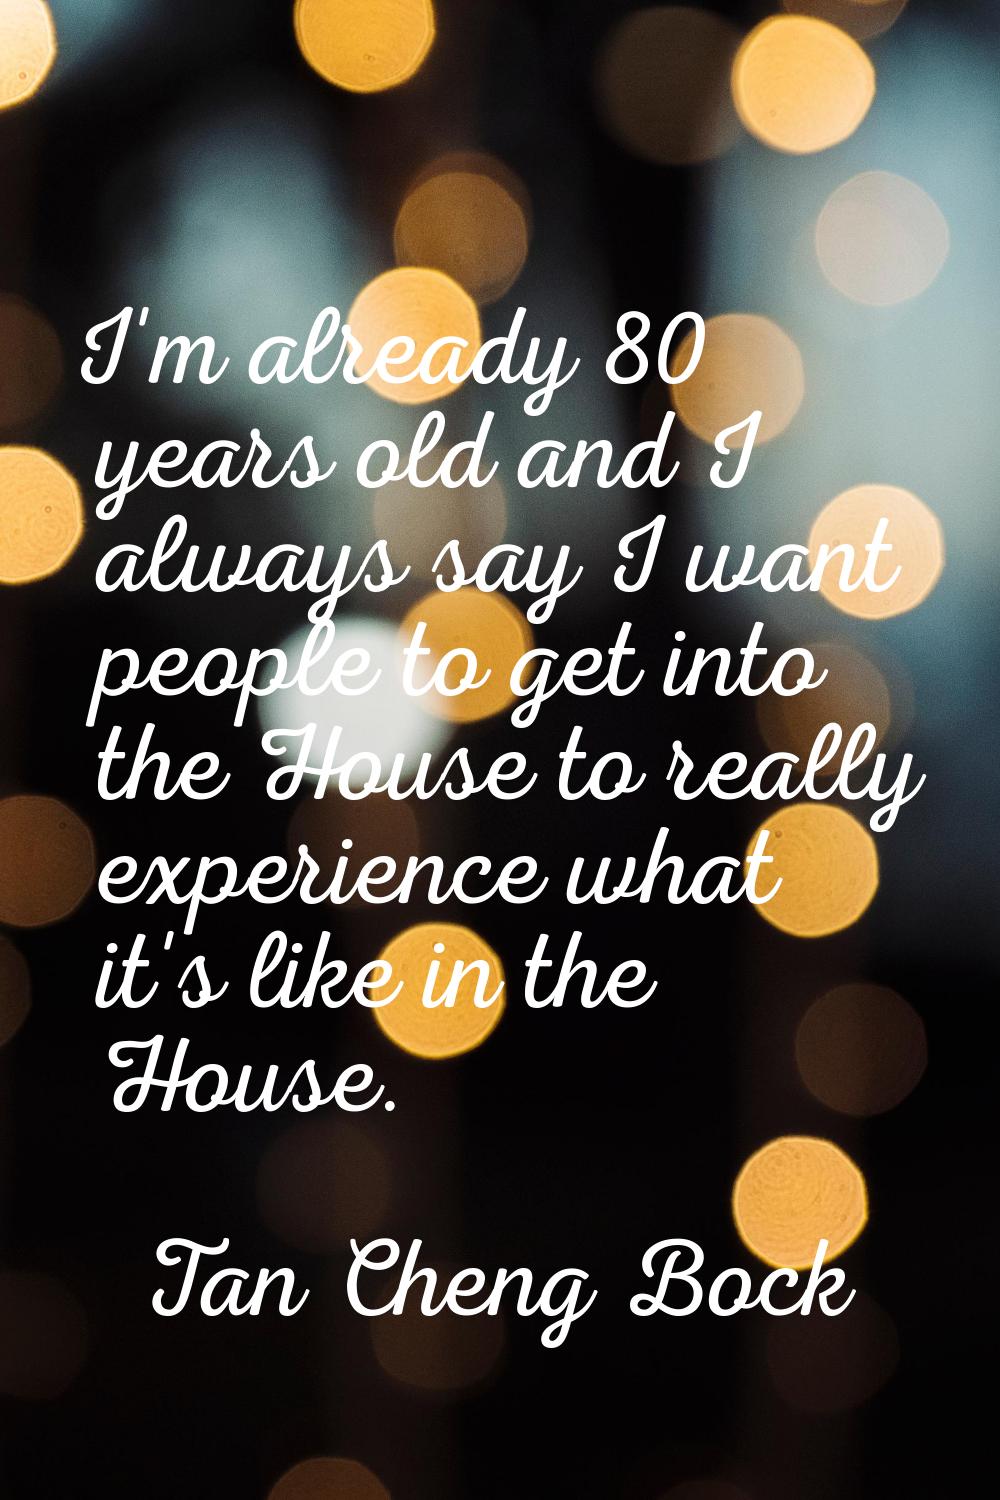 I'm already 80 years old and I always say I want people to get into the House to really experience 